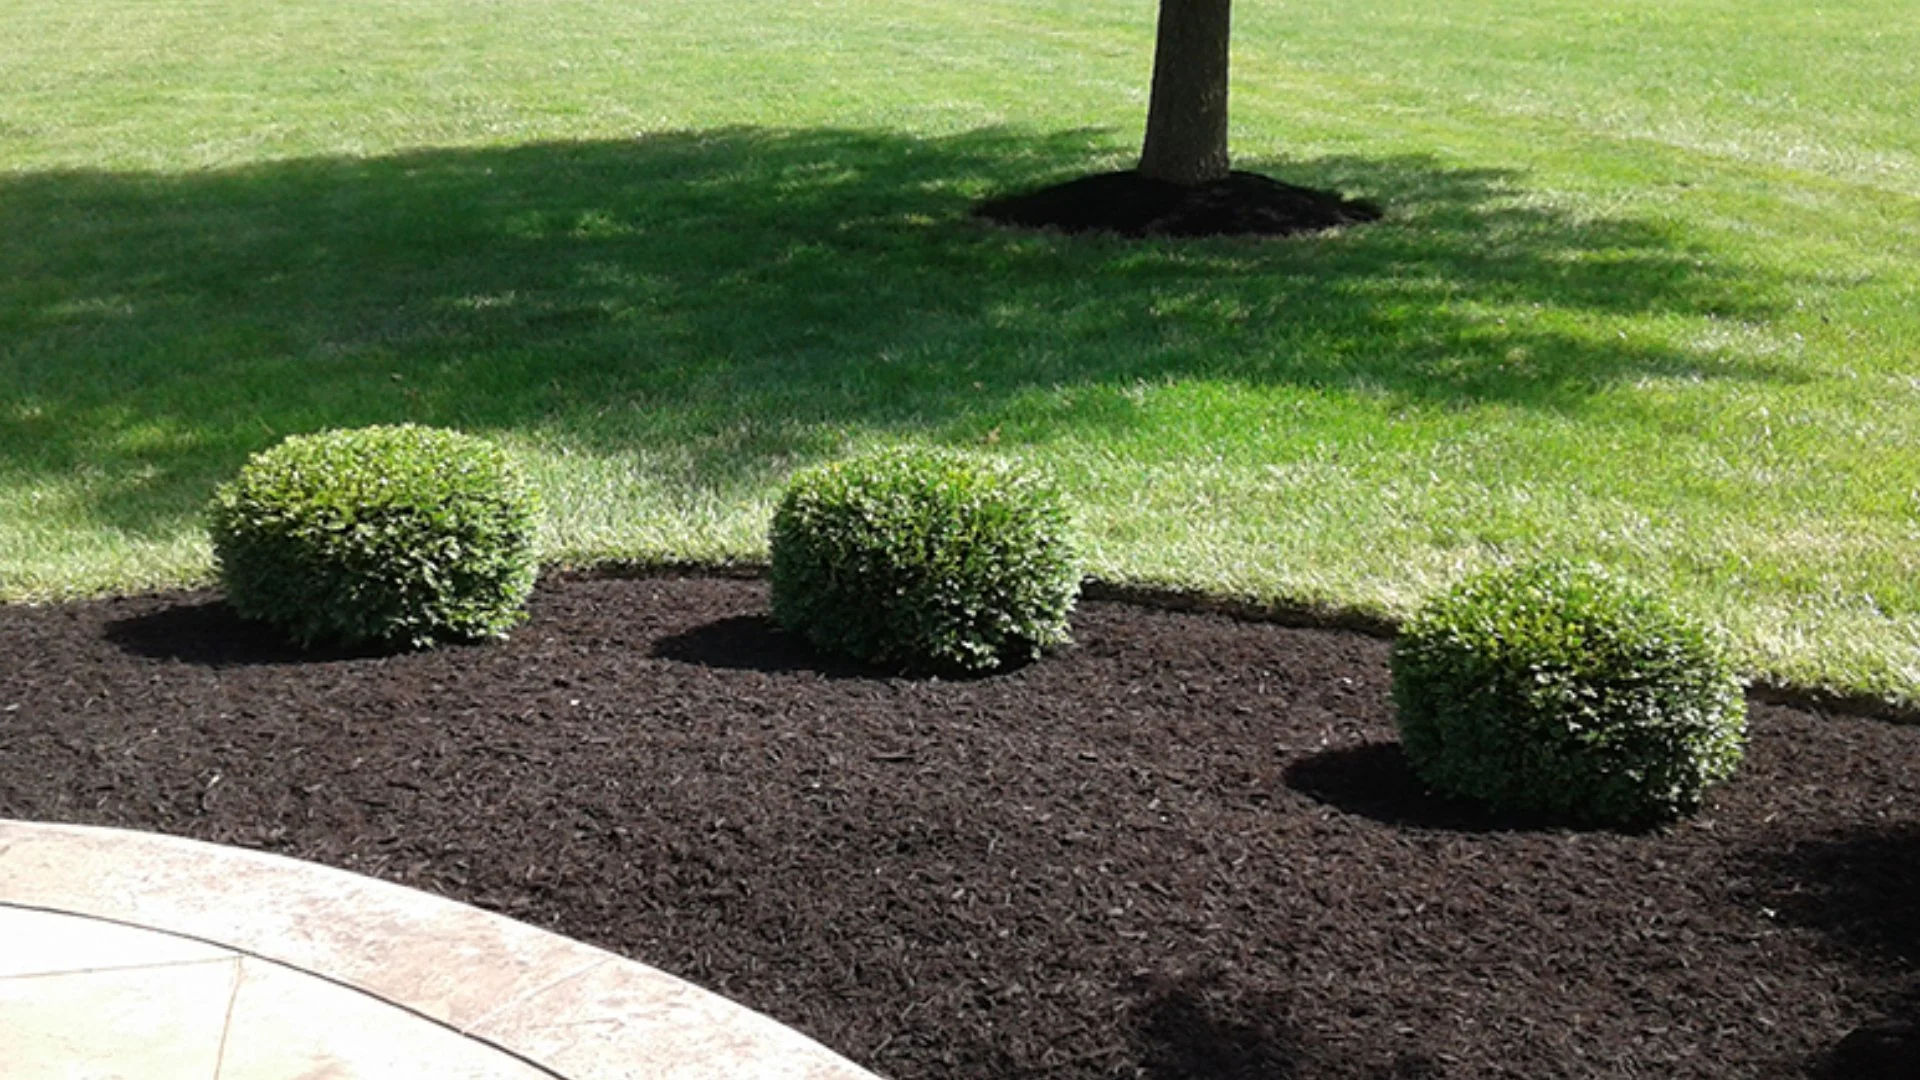 Your Mulch Ground Cover Should Be the Proper Thickness for Maximum Benefits